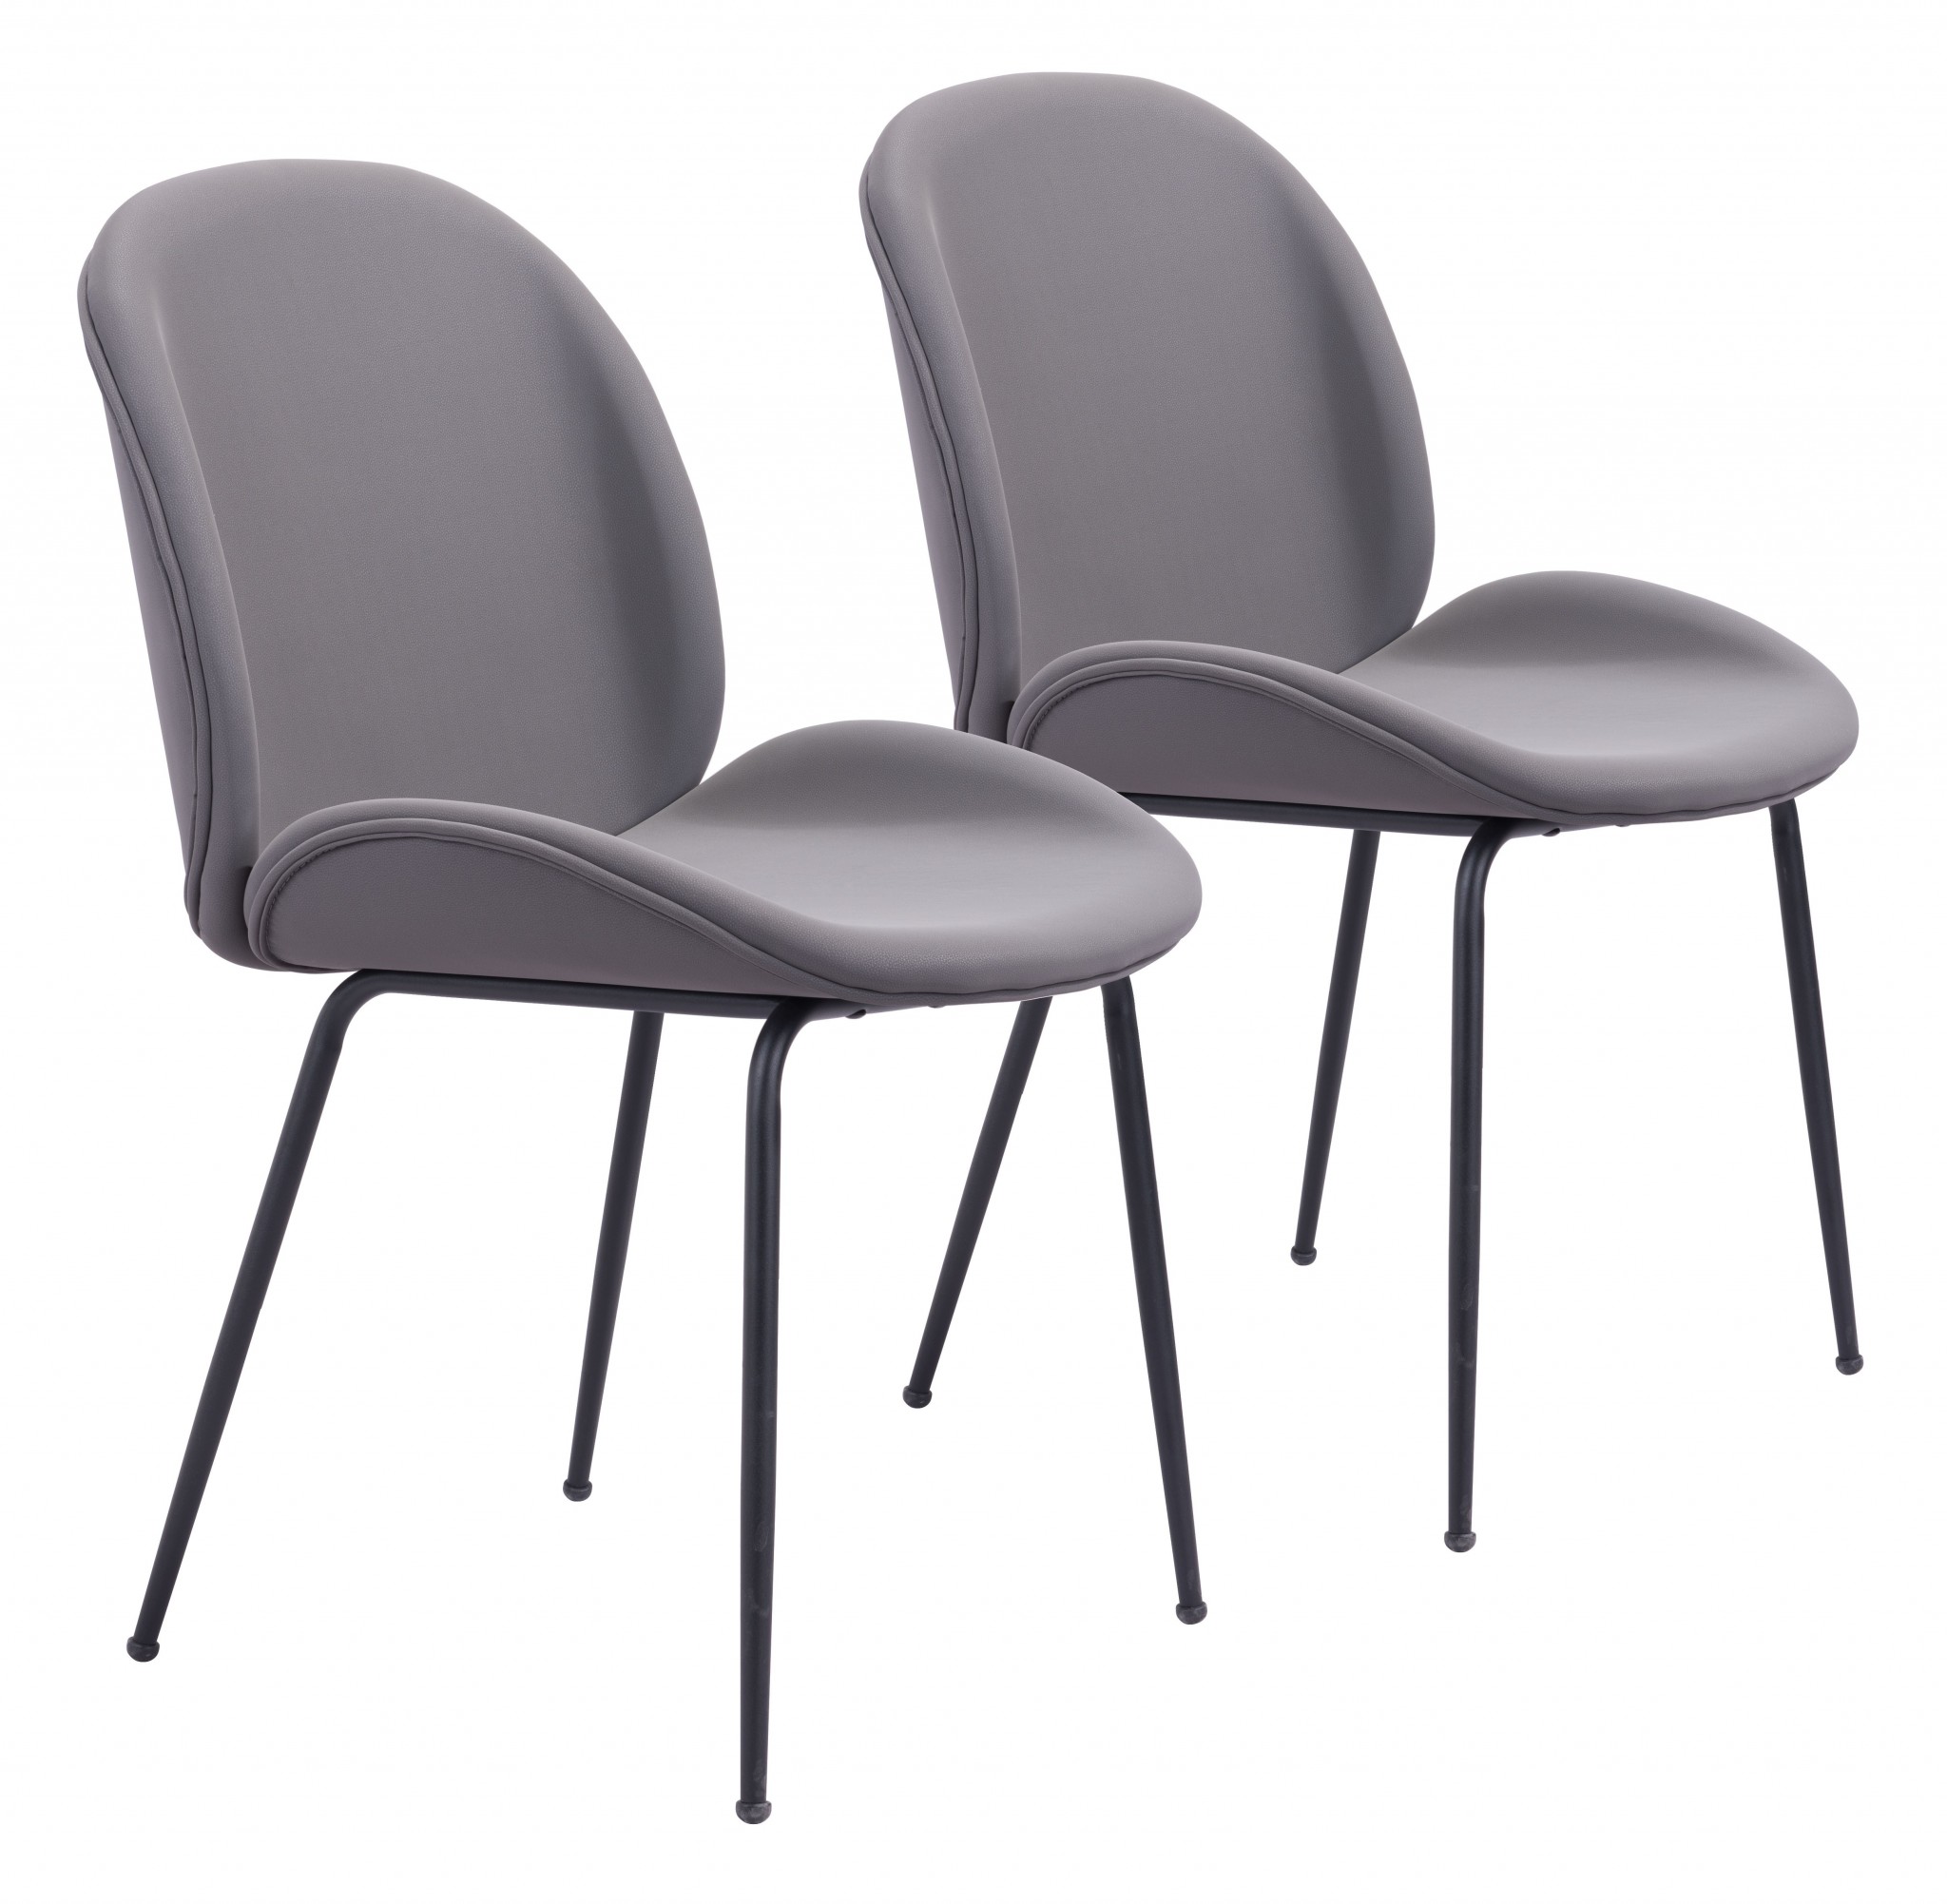 Set of Two Contempo Gray Velvet Dining Chairs